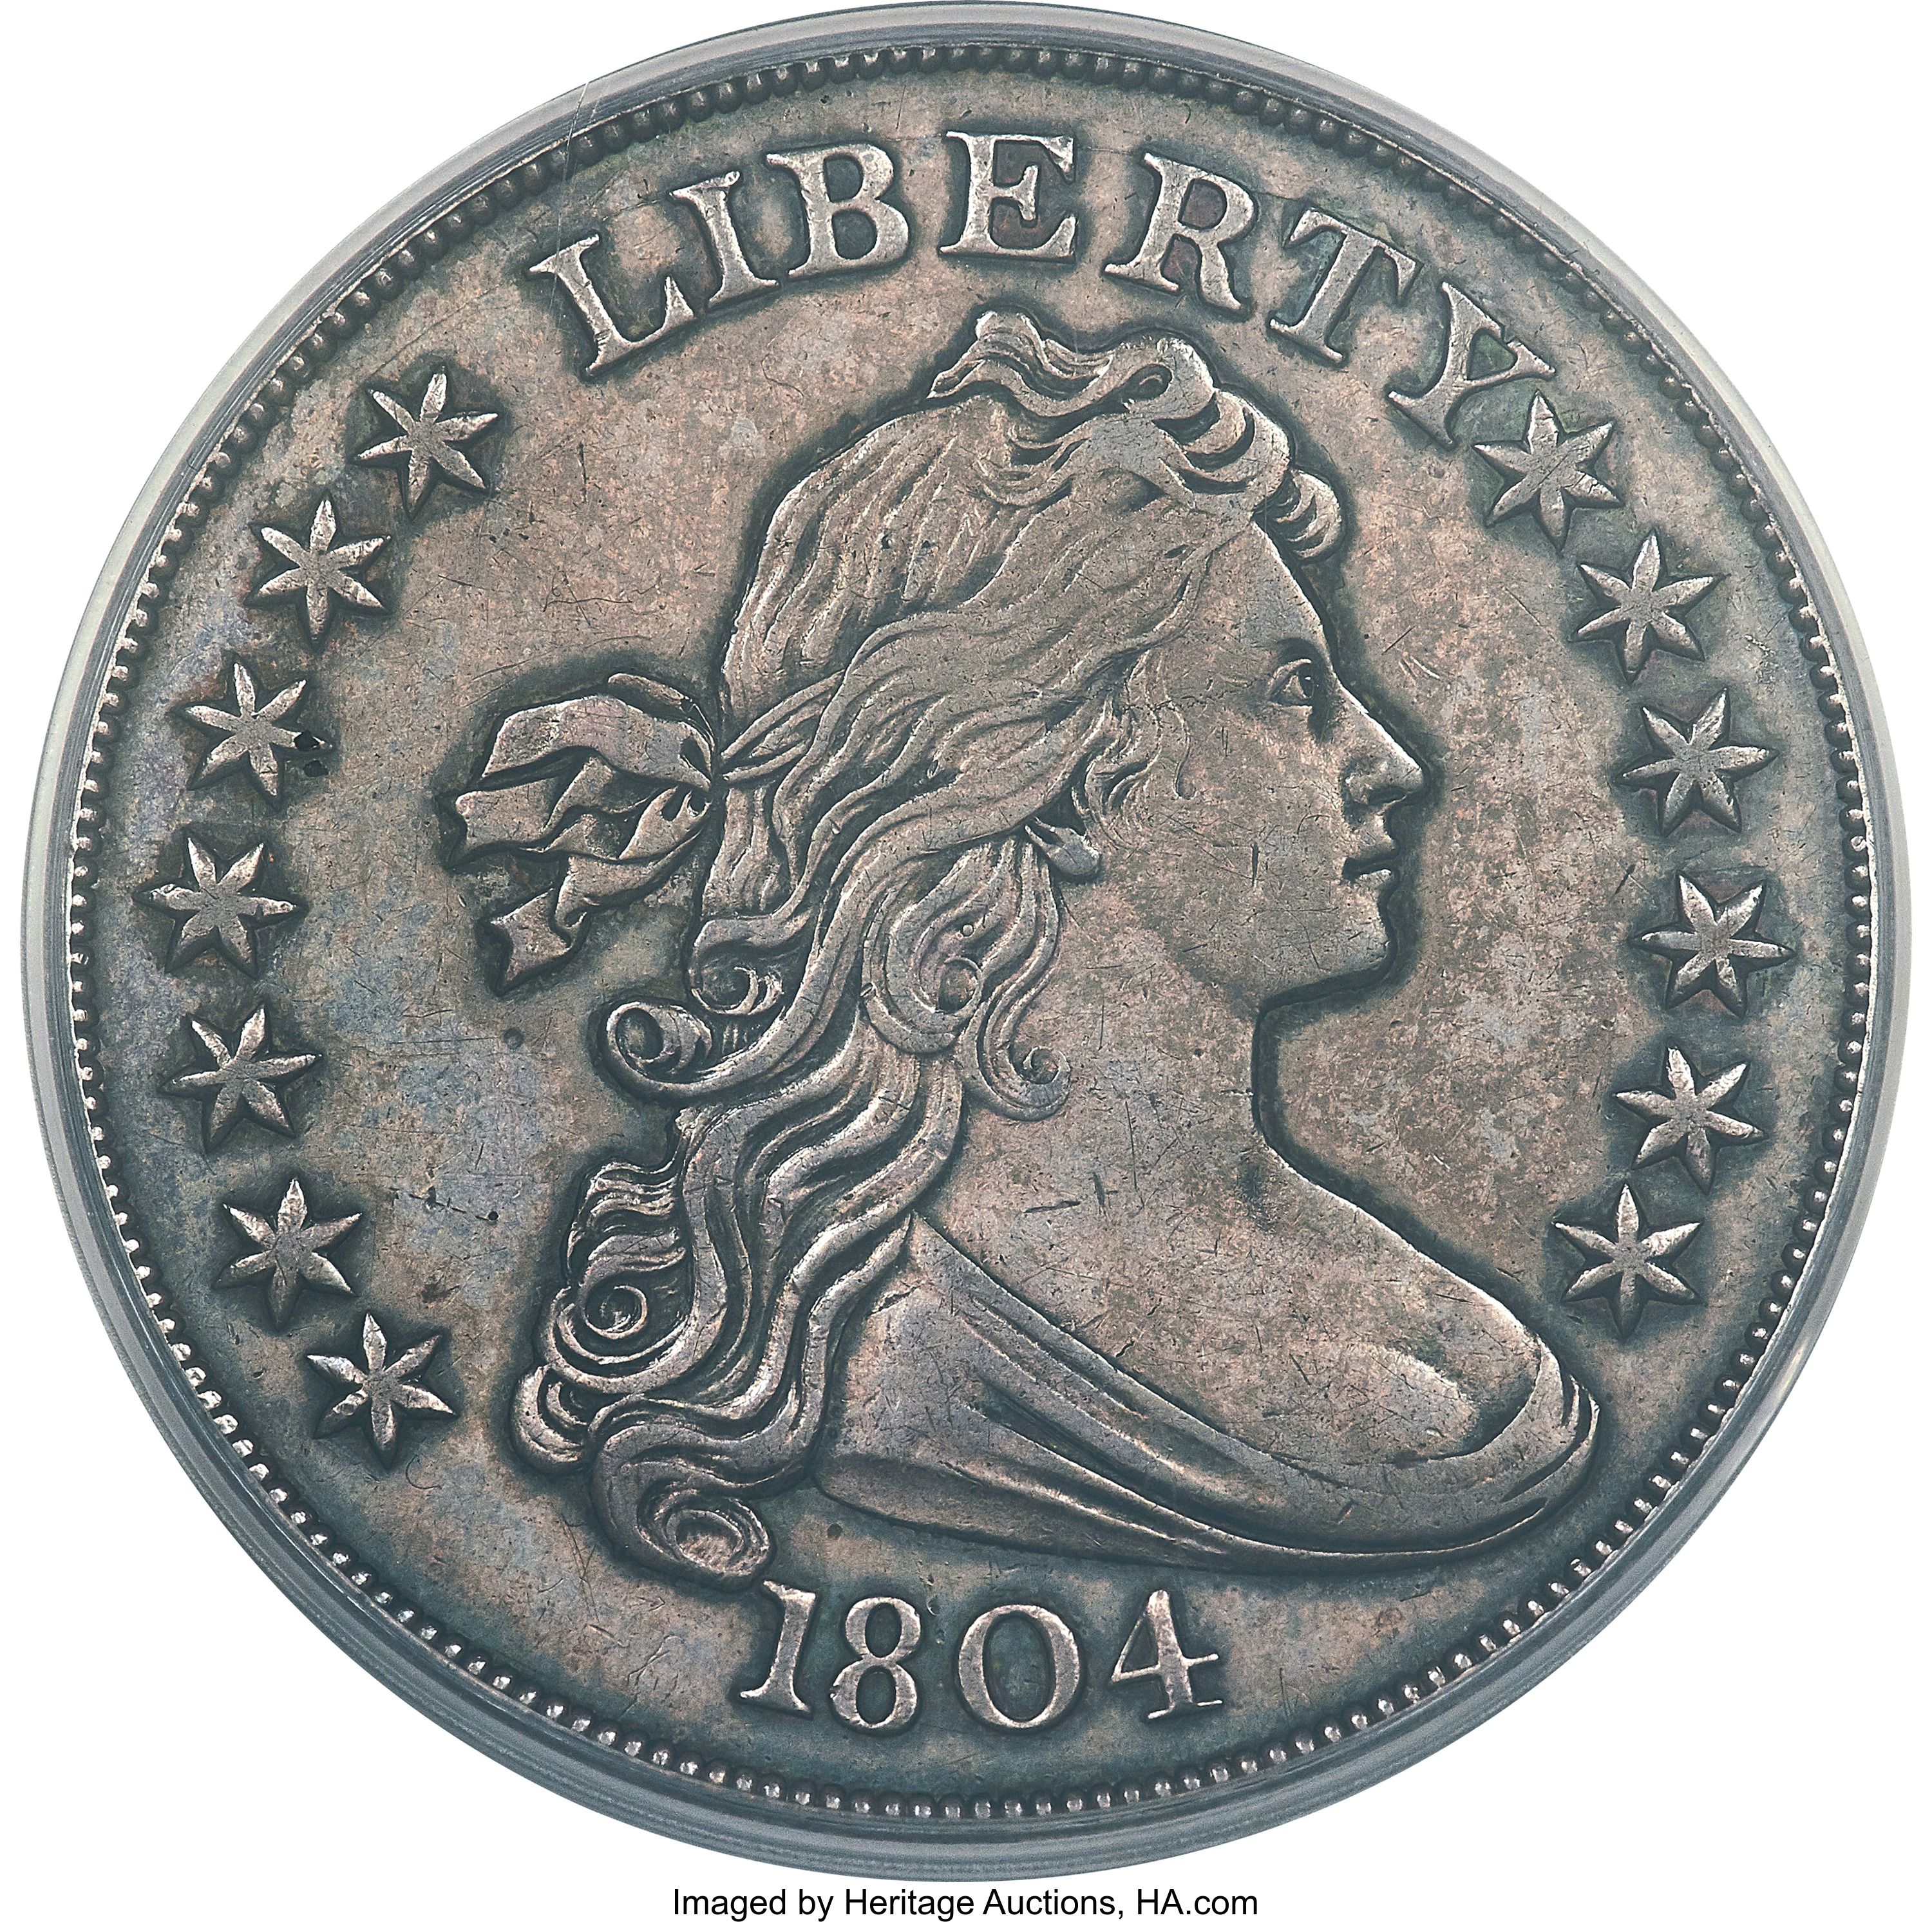 enlarged image for David Lawrence Rare Coins and D.L. Hansen Acquire the "King of American Coins"